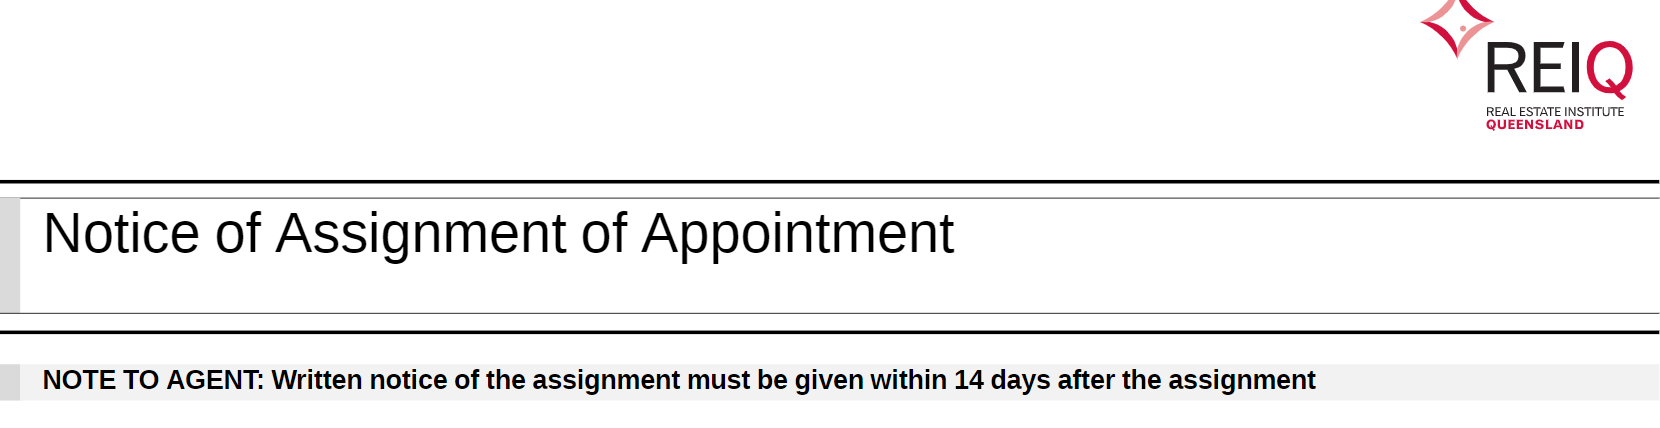 Notice of Assignment of Appointment